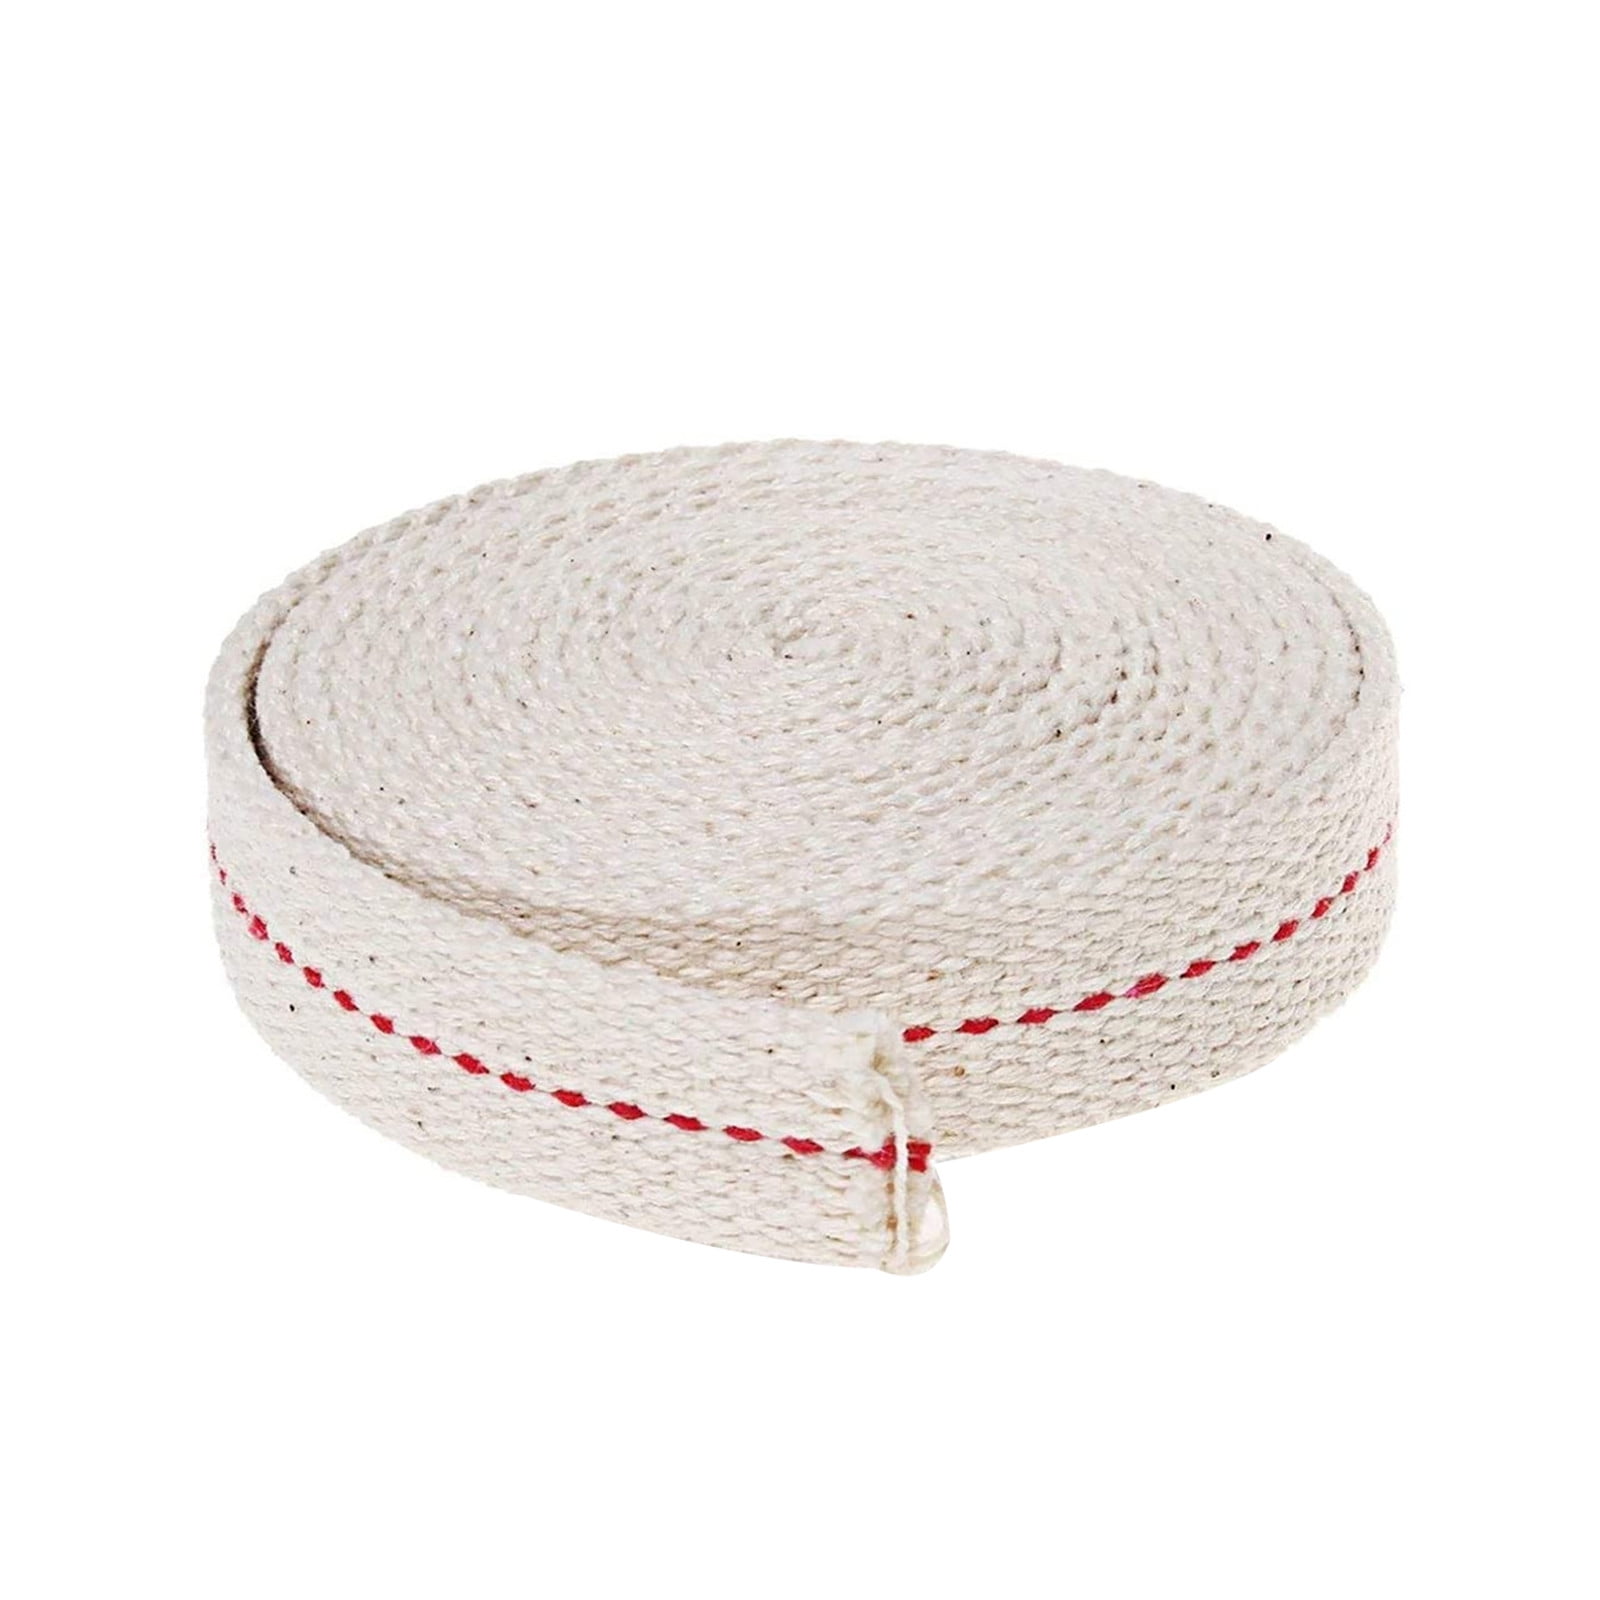 3/4 Inch Flat Cotton Wick 15 Foot Length Wick For Oil Lamps And Lanterns 4.5M 